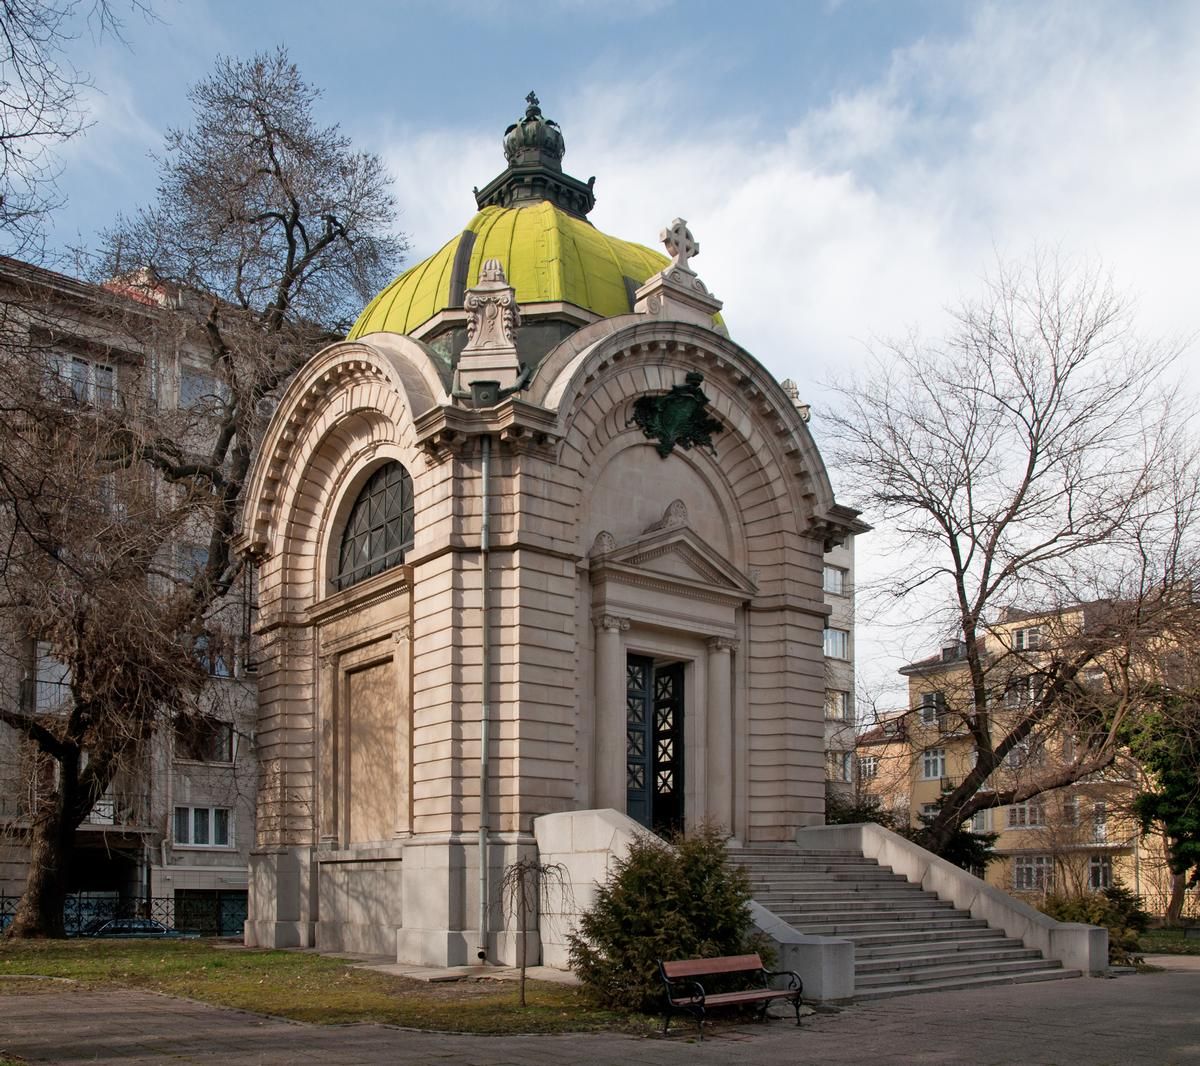 The Memorial Tomb of Alexander I of Battenberg known as the Battenberg Mausoleum - Sofia, Bulgaria 